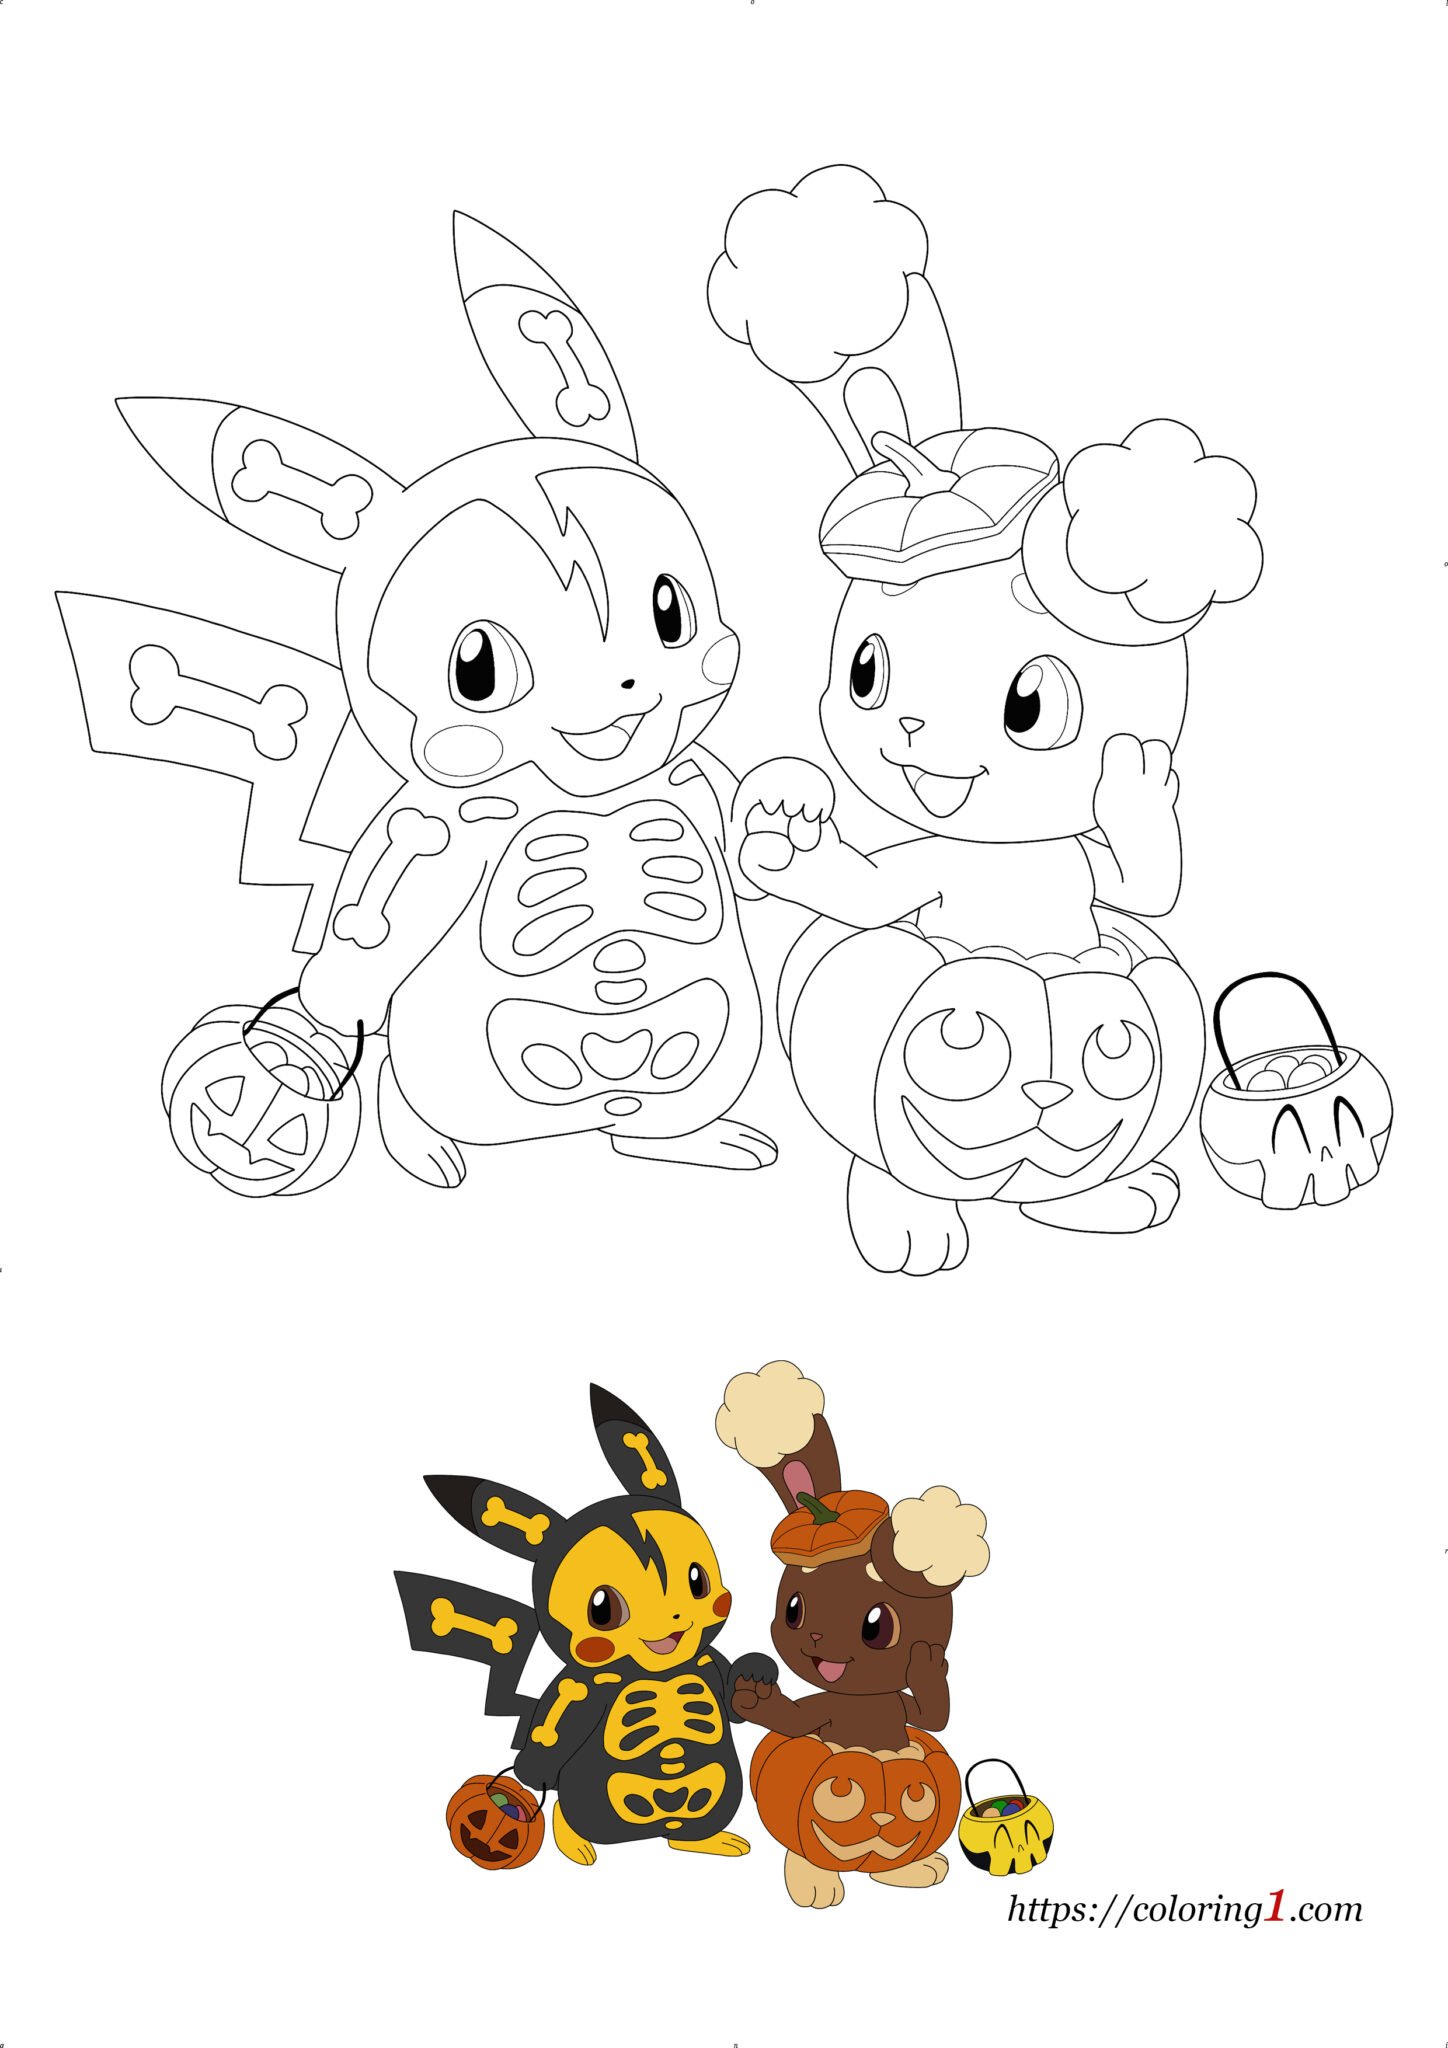 Pokemon Halloween Coloring Pages 2 Free Coloring Sheets (2021)